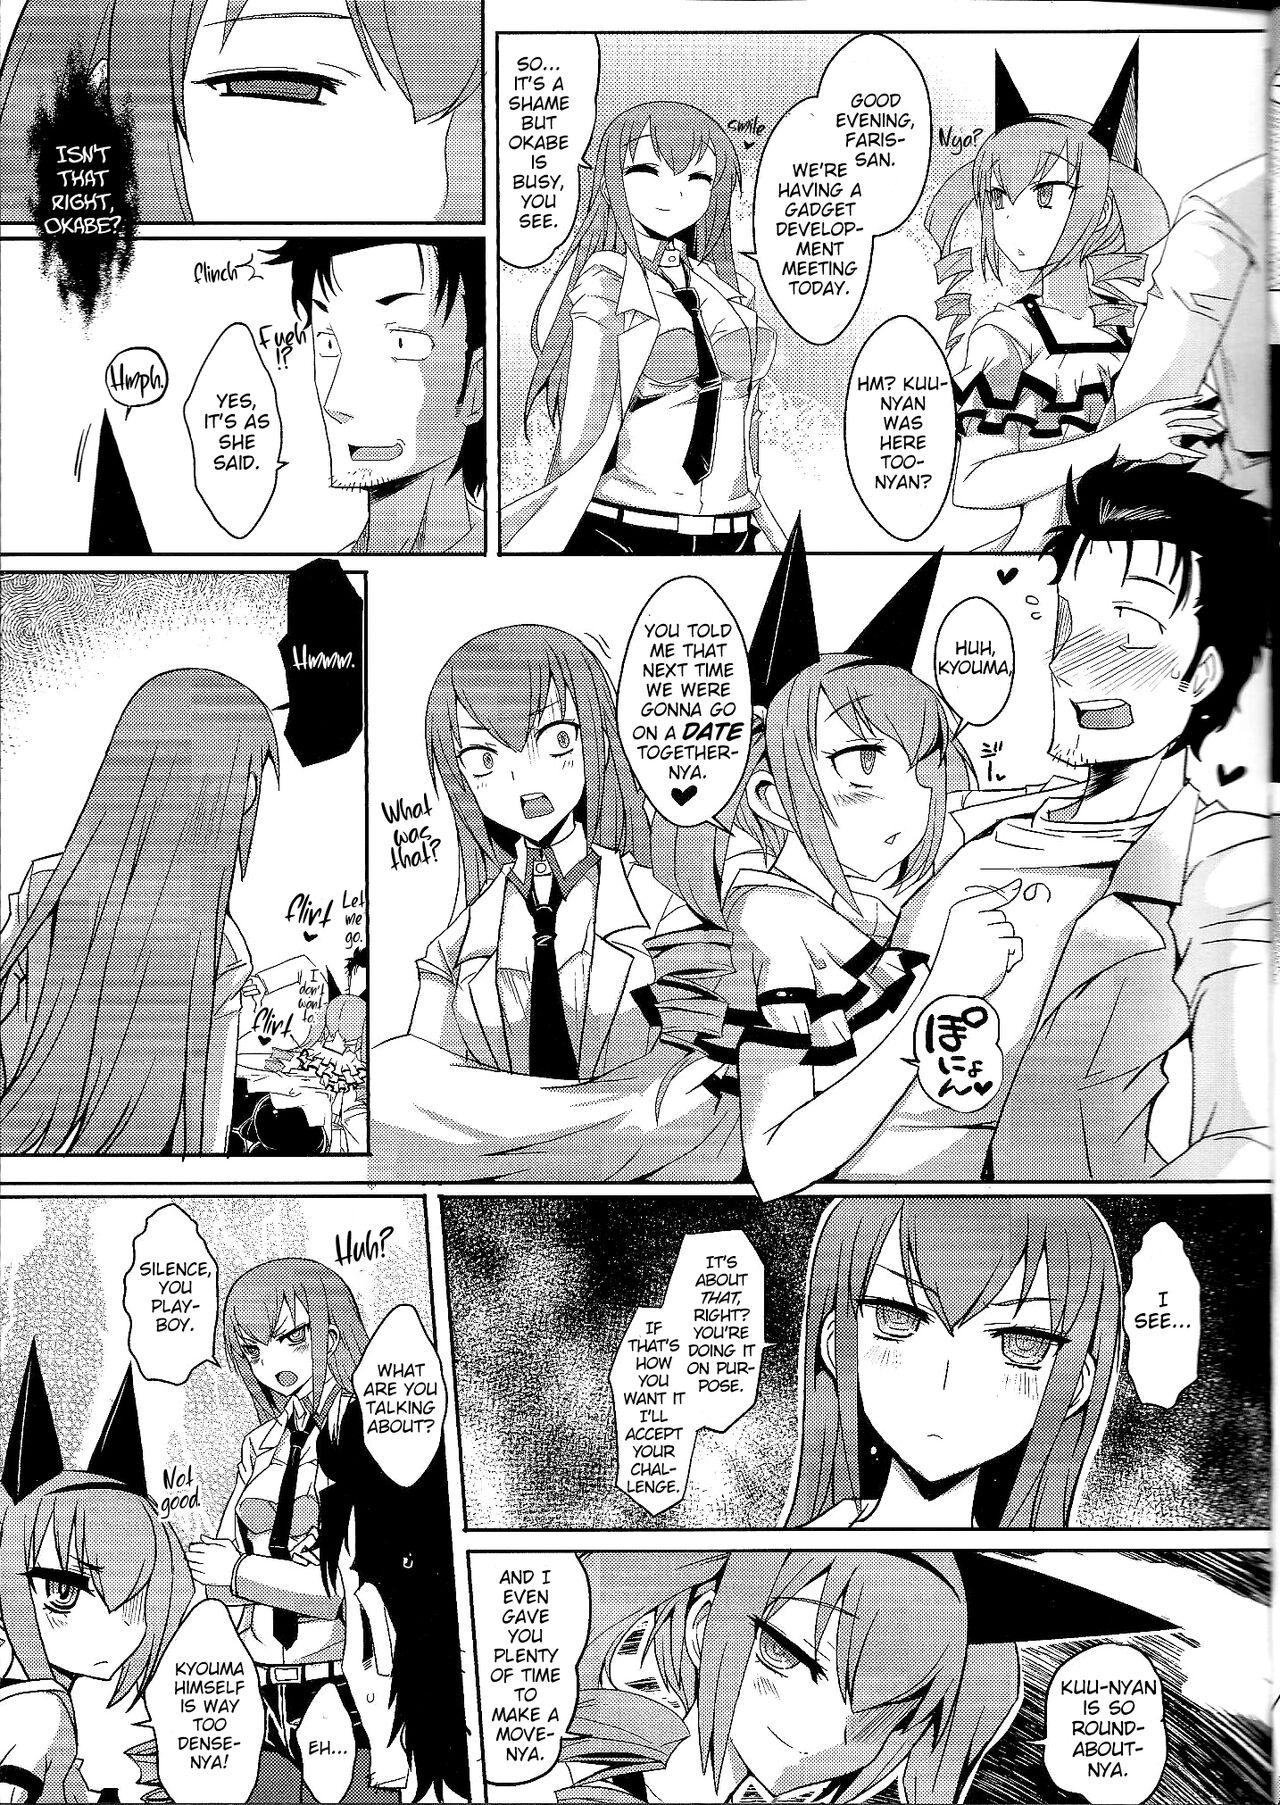 British Kenjin Chijou no Sodoministers - Steinsgate Gang - Page 6